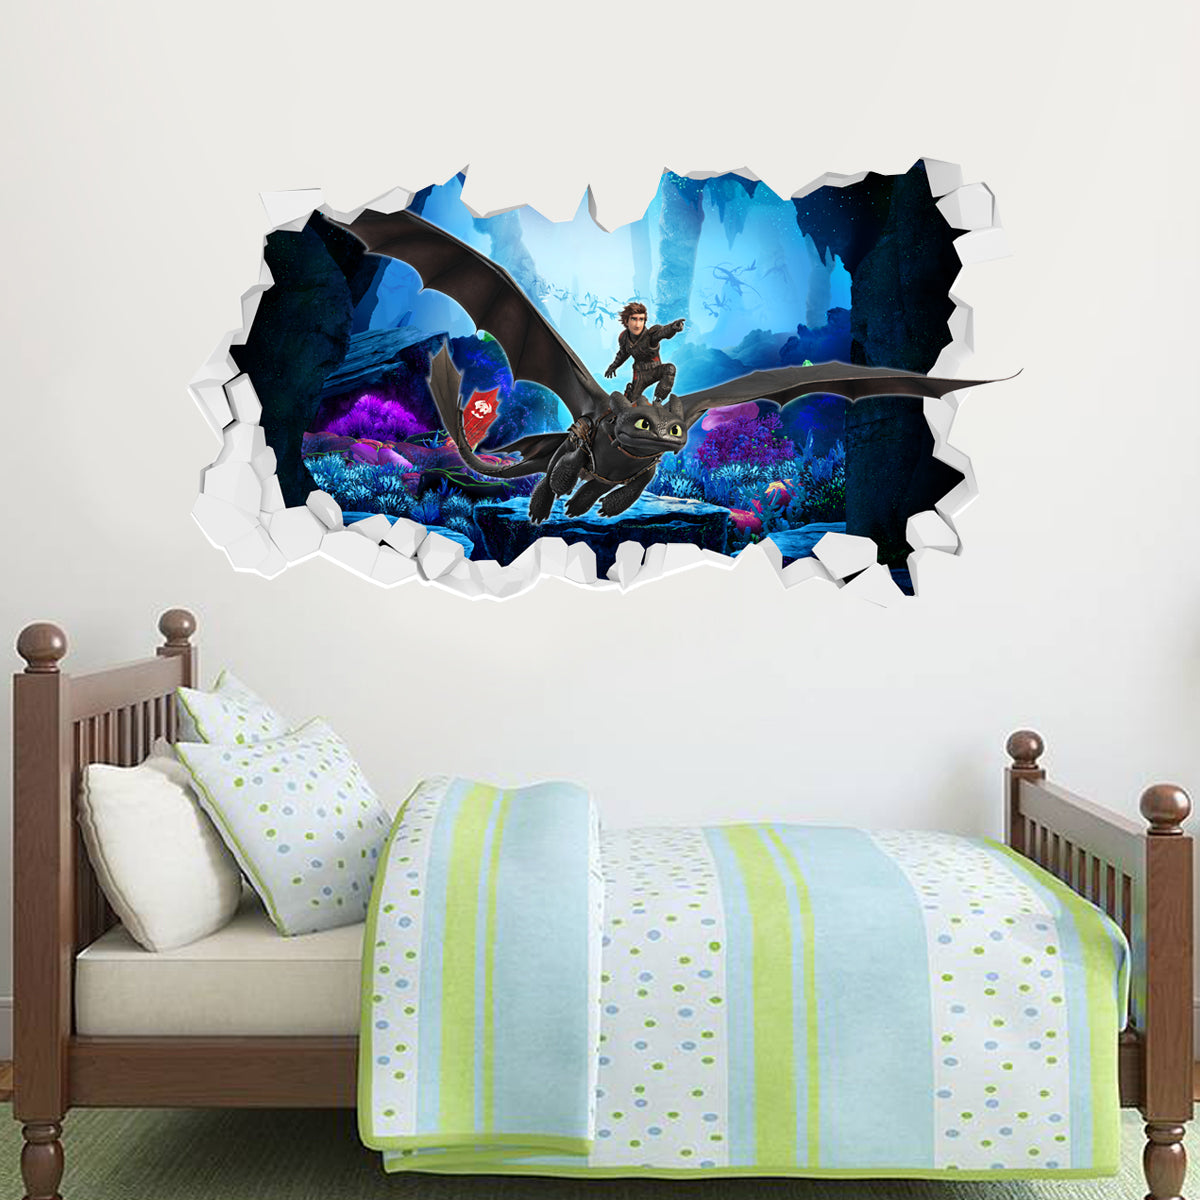 How To Train Your Dragon Hiccup Toothless Broken Wall Sticker